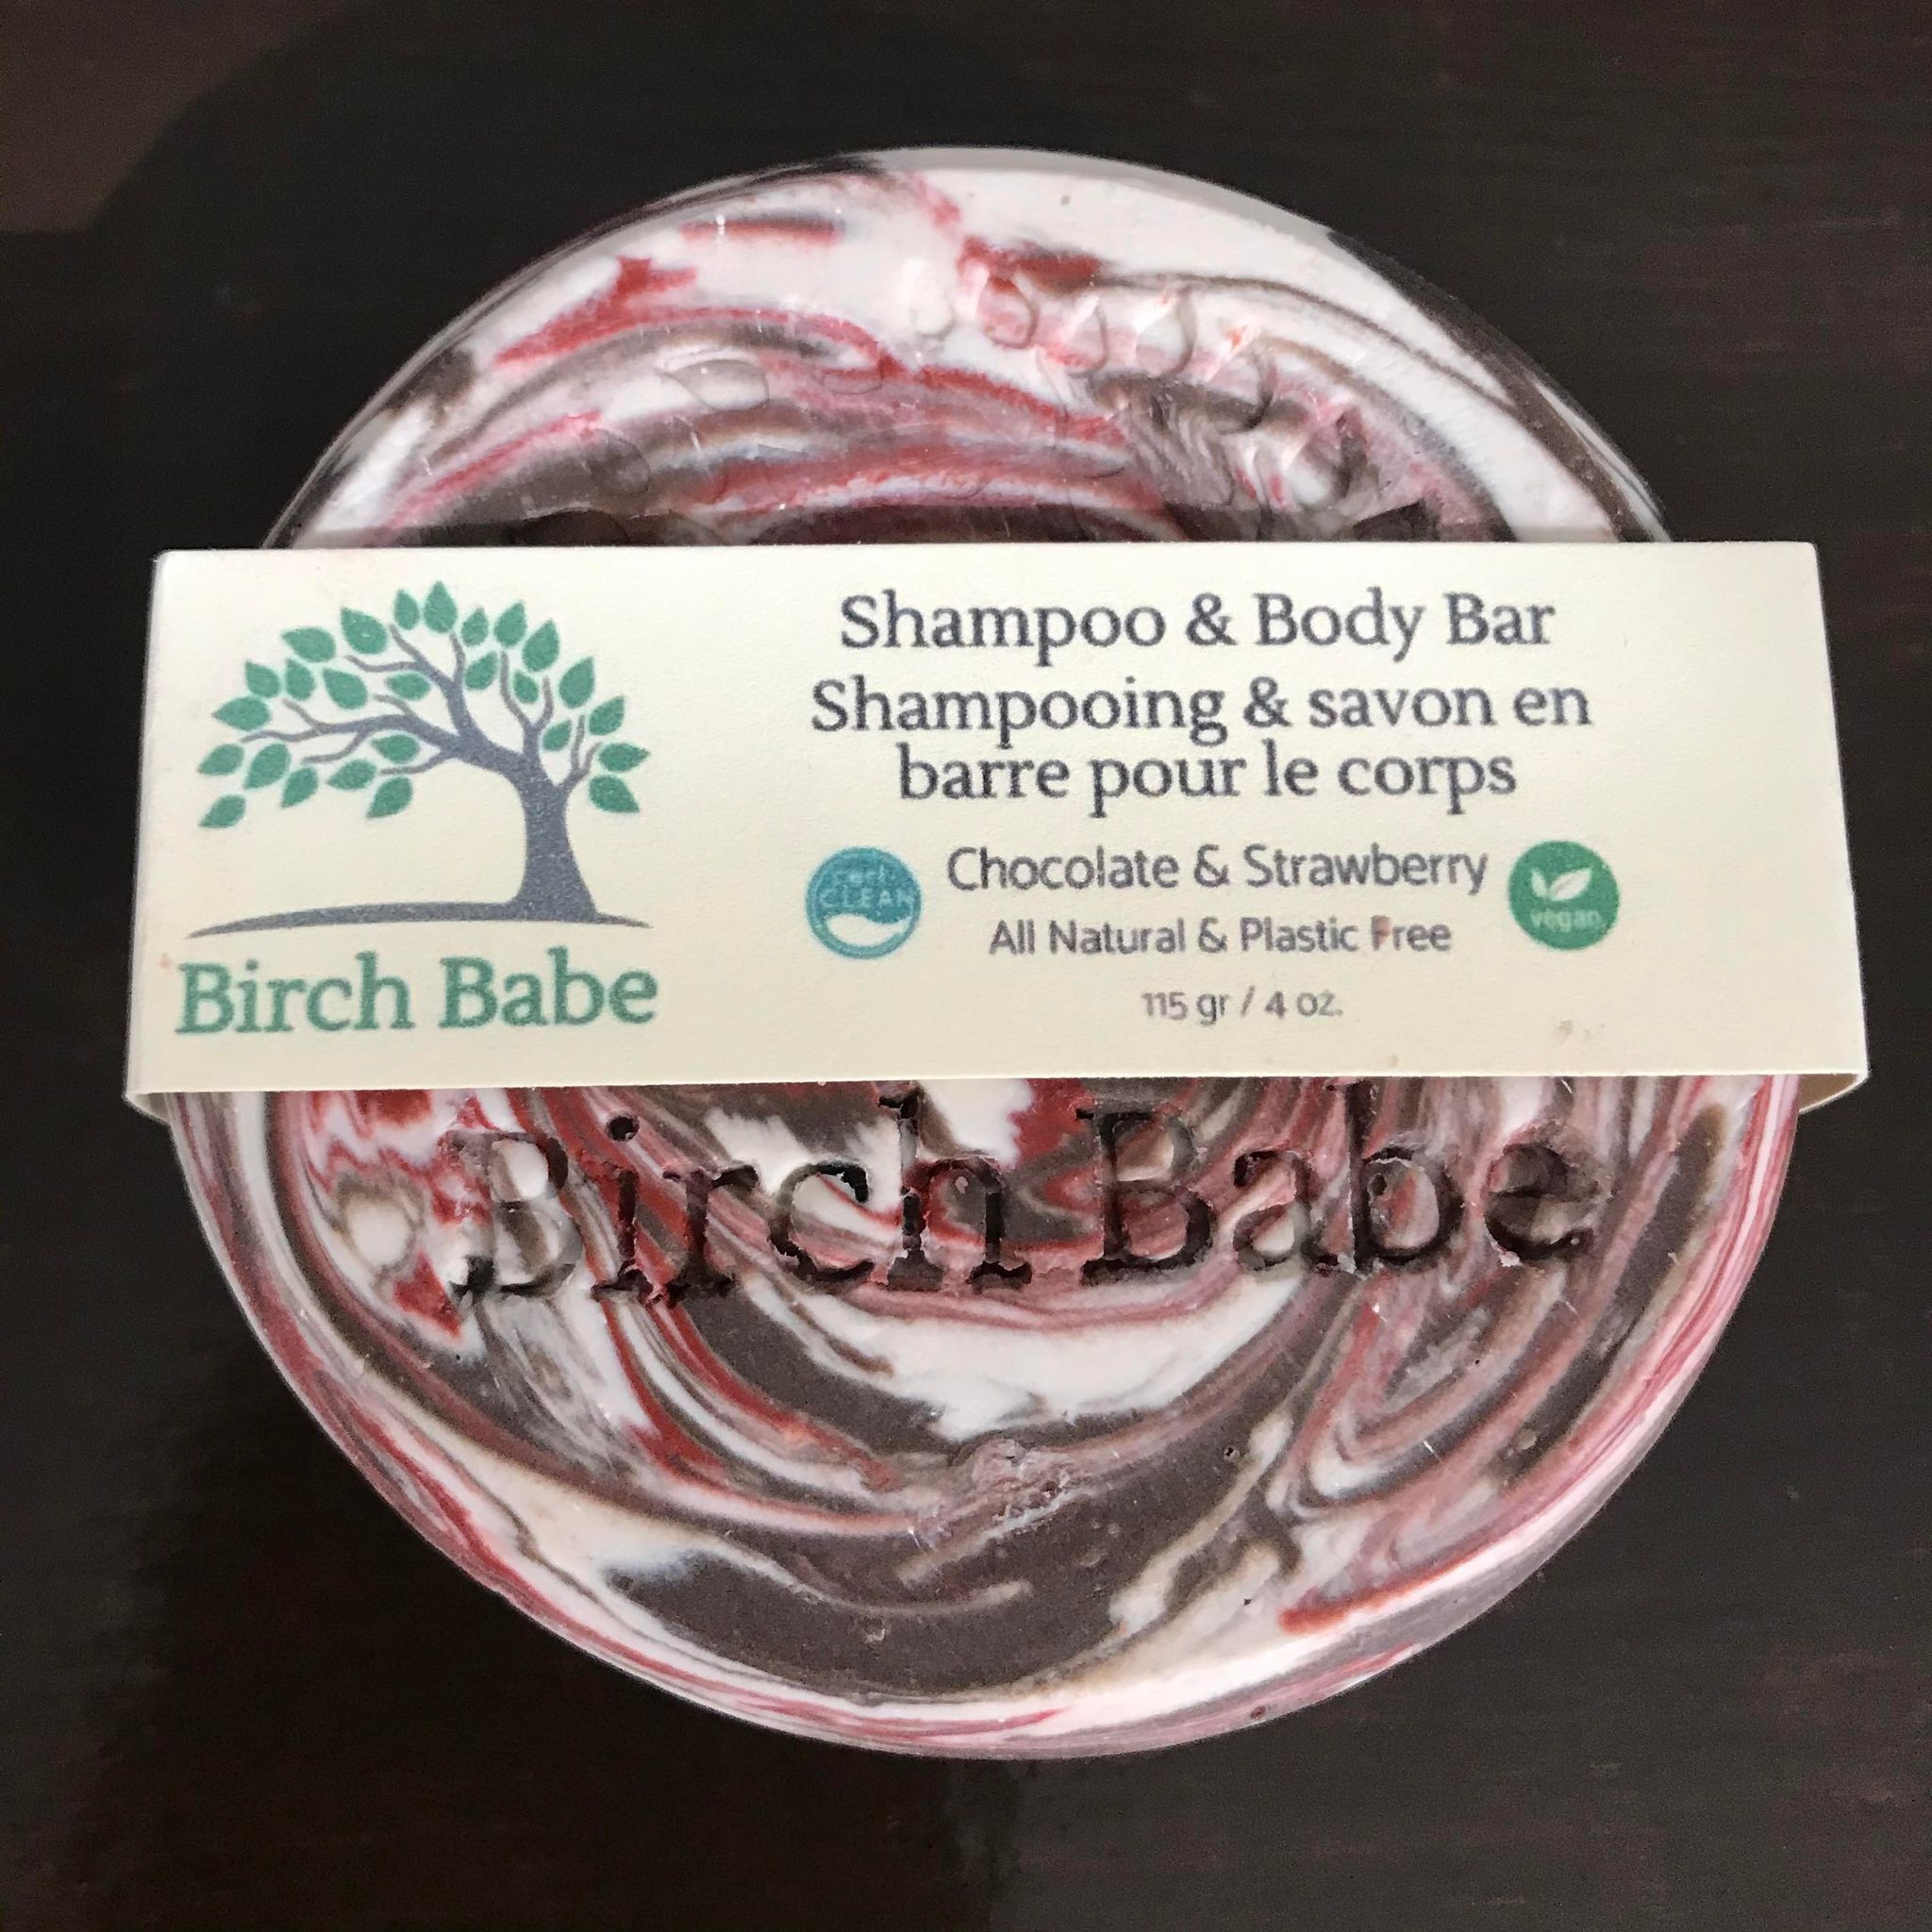 Chocolate Strawberry shampoo and body bar made in Canada by Birch Babe is a special dreamy blend that will leave your hair silky, your body nourished and your bathroom smelling like a dream!